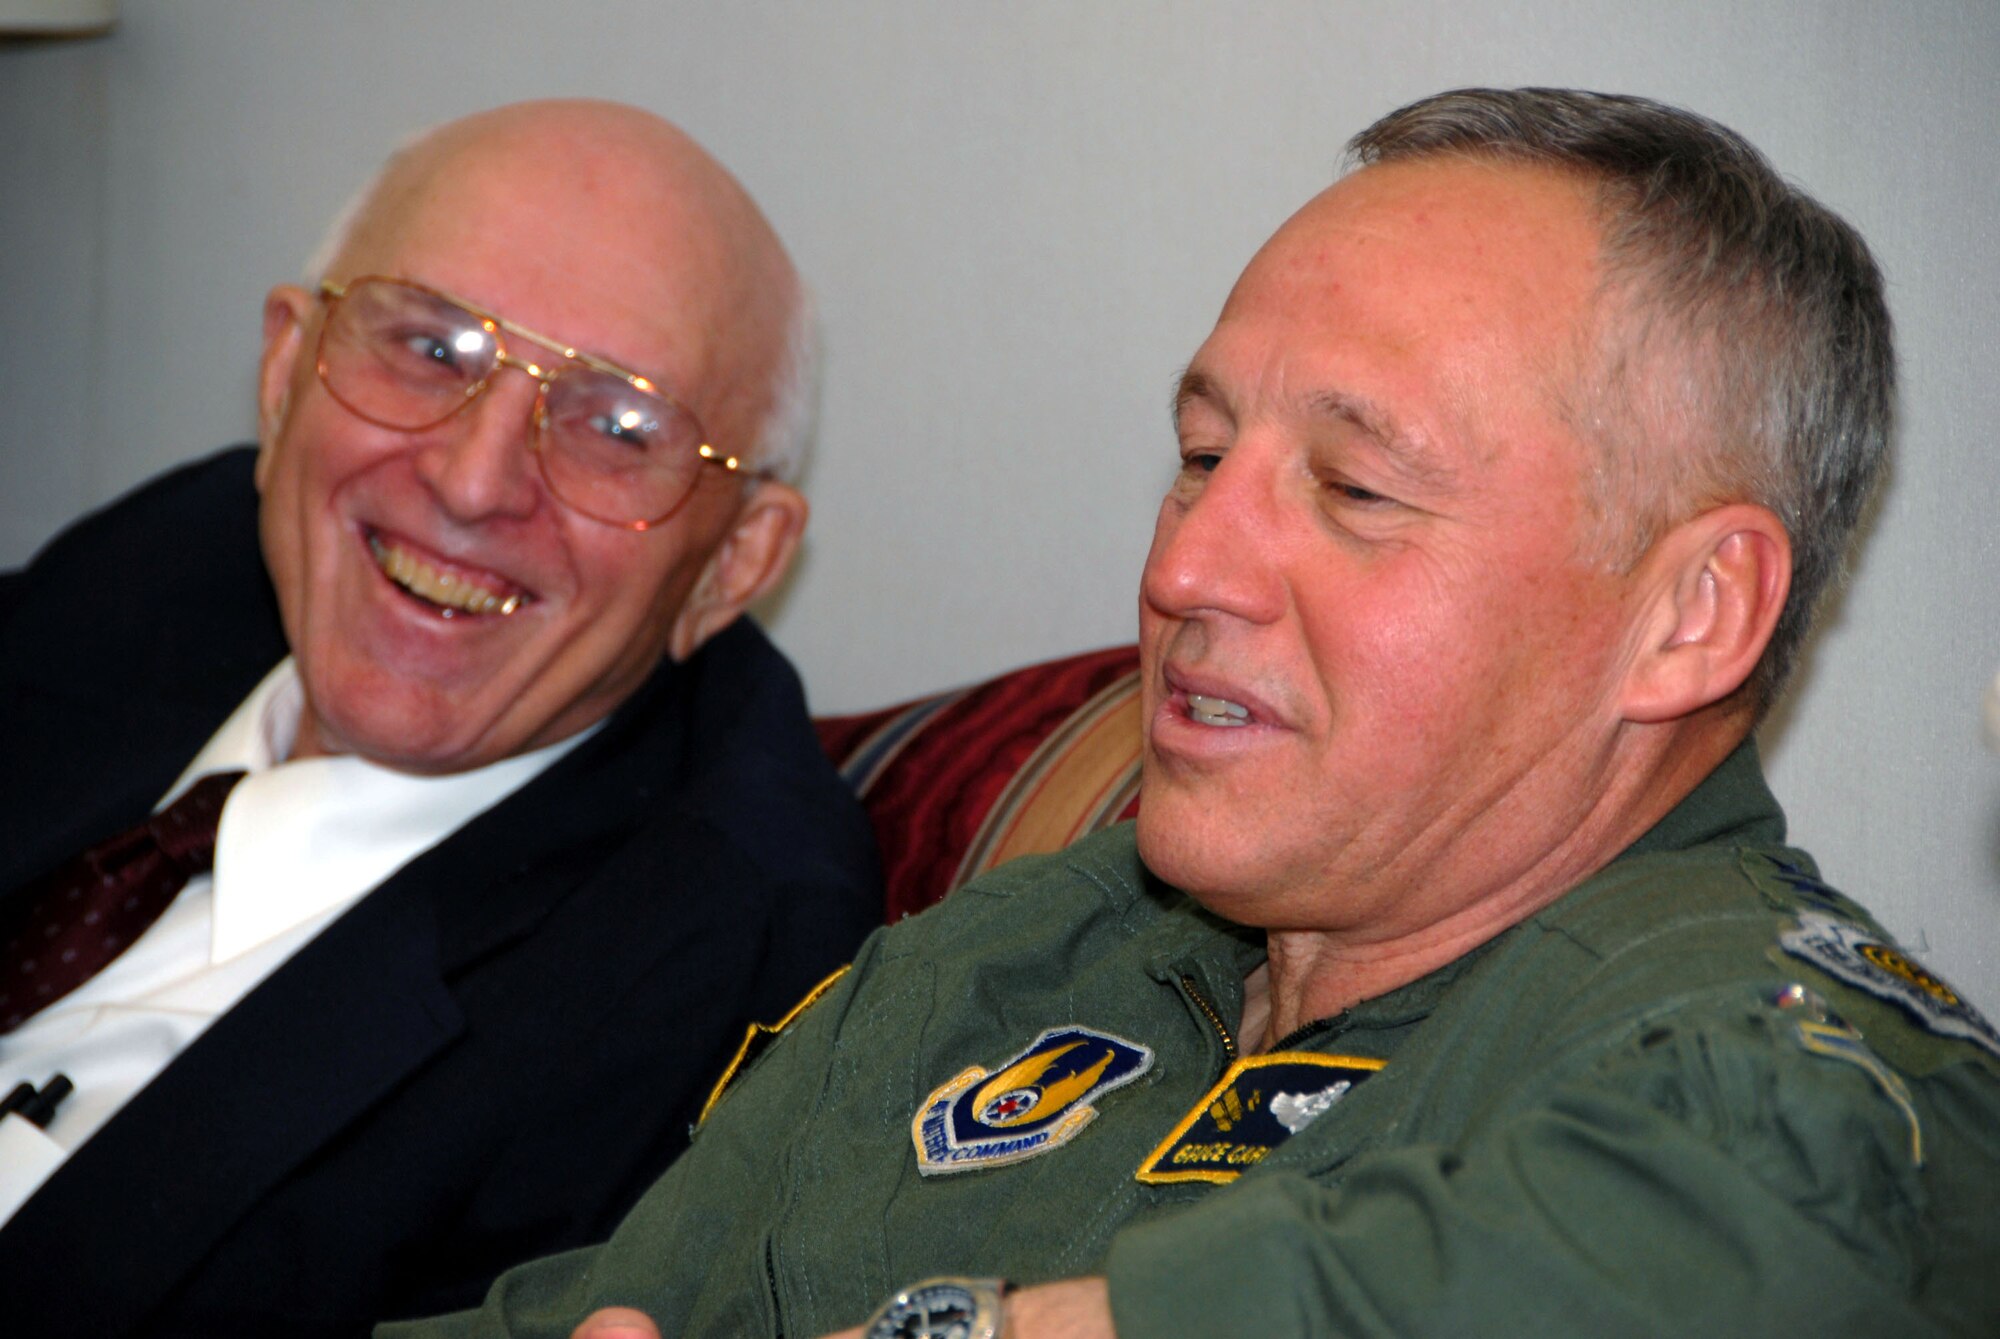 Gen. Bruce Carlson, commander, Air Force Materiel Command, shares a laugh with retired Lt. Col. William Desmond Jr. during a visit to Maxwell Air Force Base, Ala., April 17. General Carlson reunited with two of his former ROTC instructors after more than 36 years. (Air Force photo by Tech. Sgt. Scott Moorman)